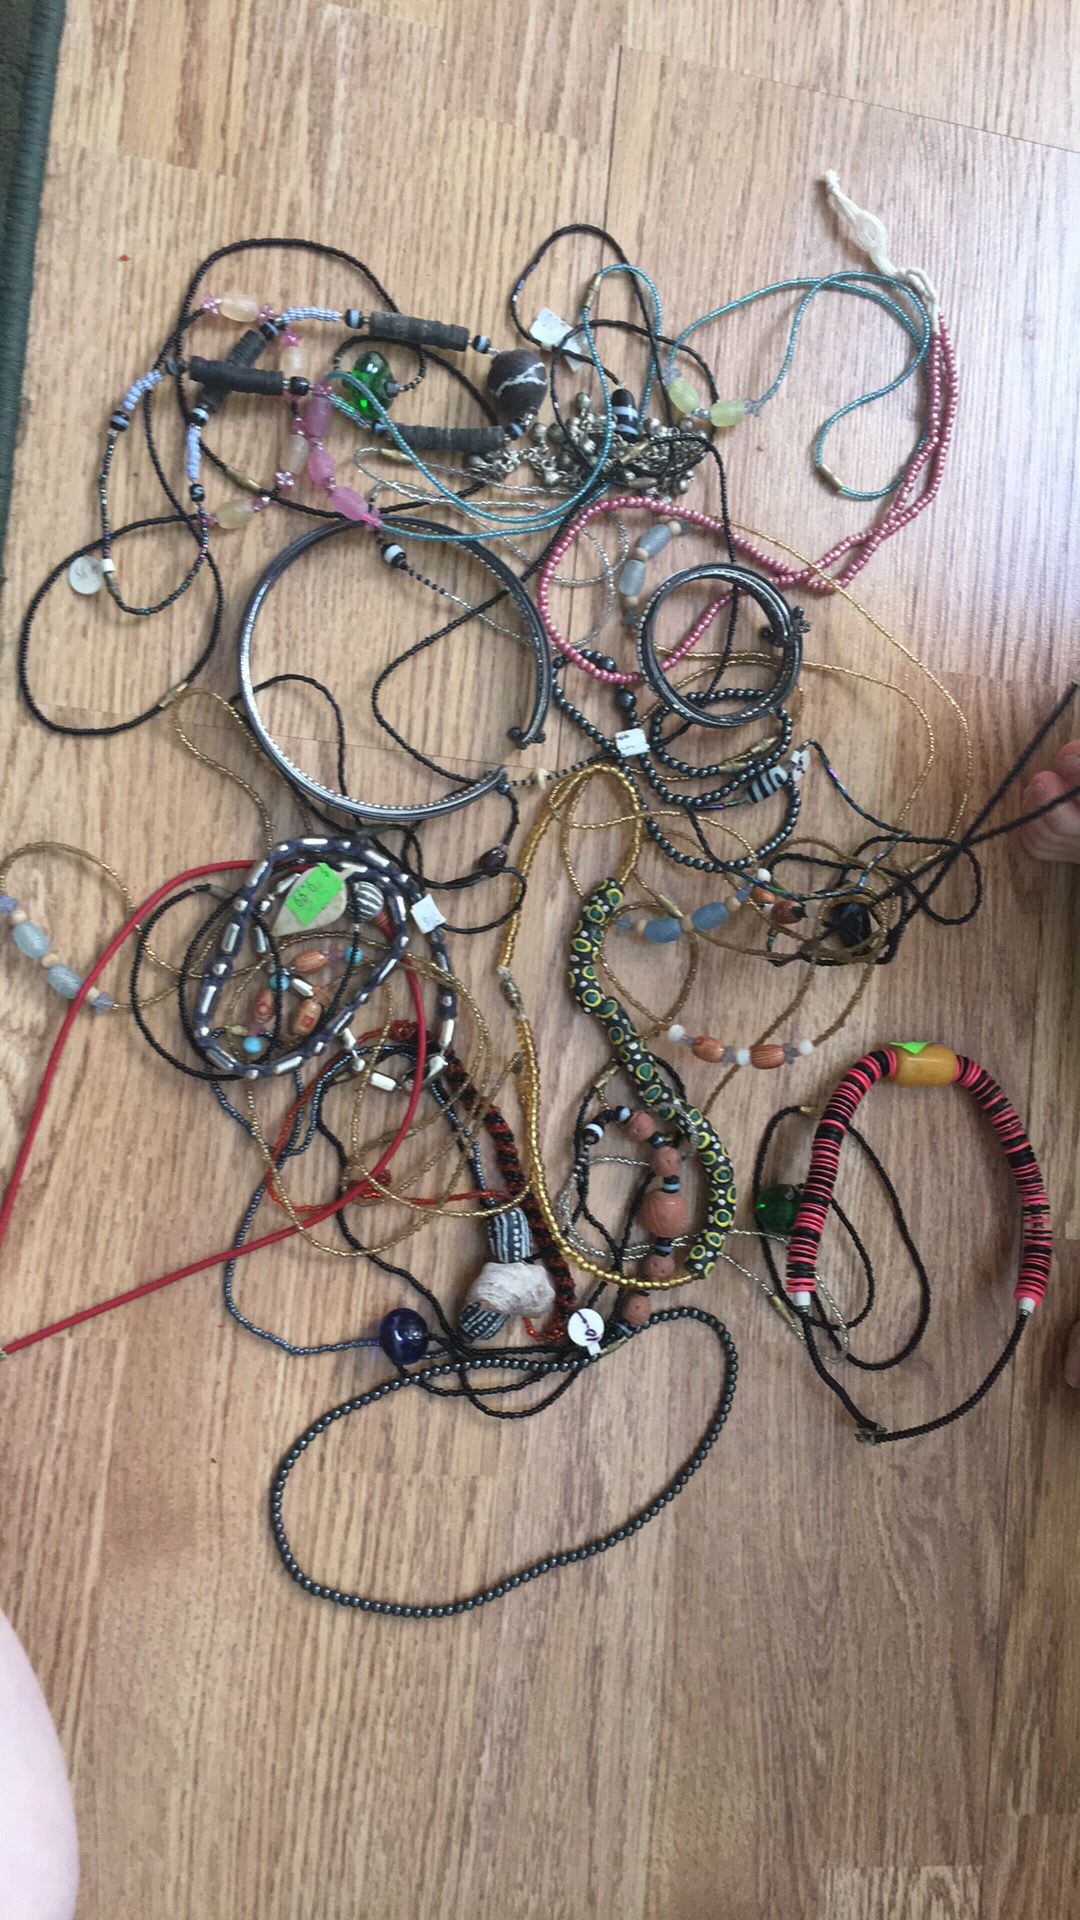 35 Pieces of accessories and jewelry